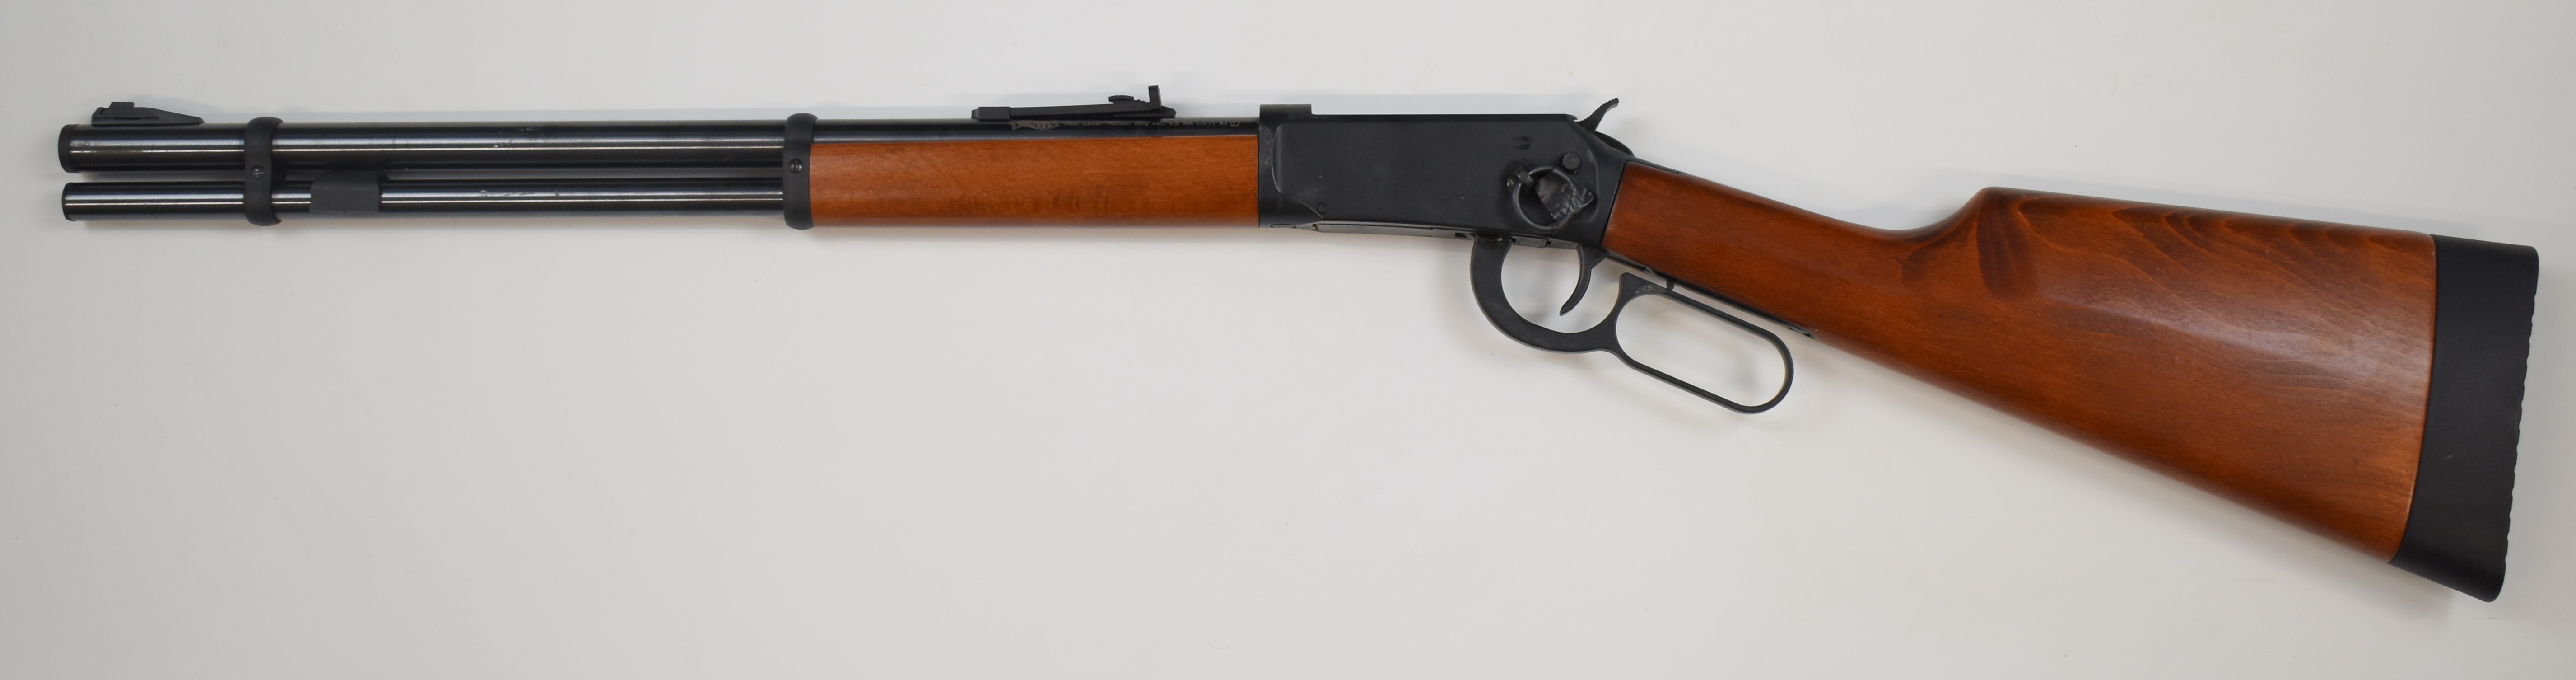 Walther Winchester style lever-action .177 CO2 carbine air rifle with two 8 shot magazines, - Image 6 of 11